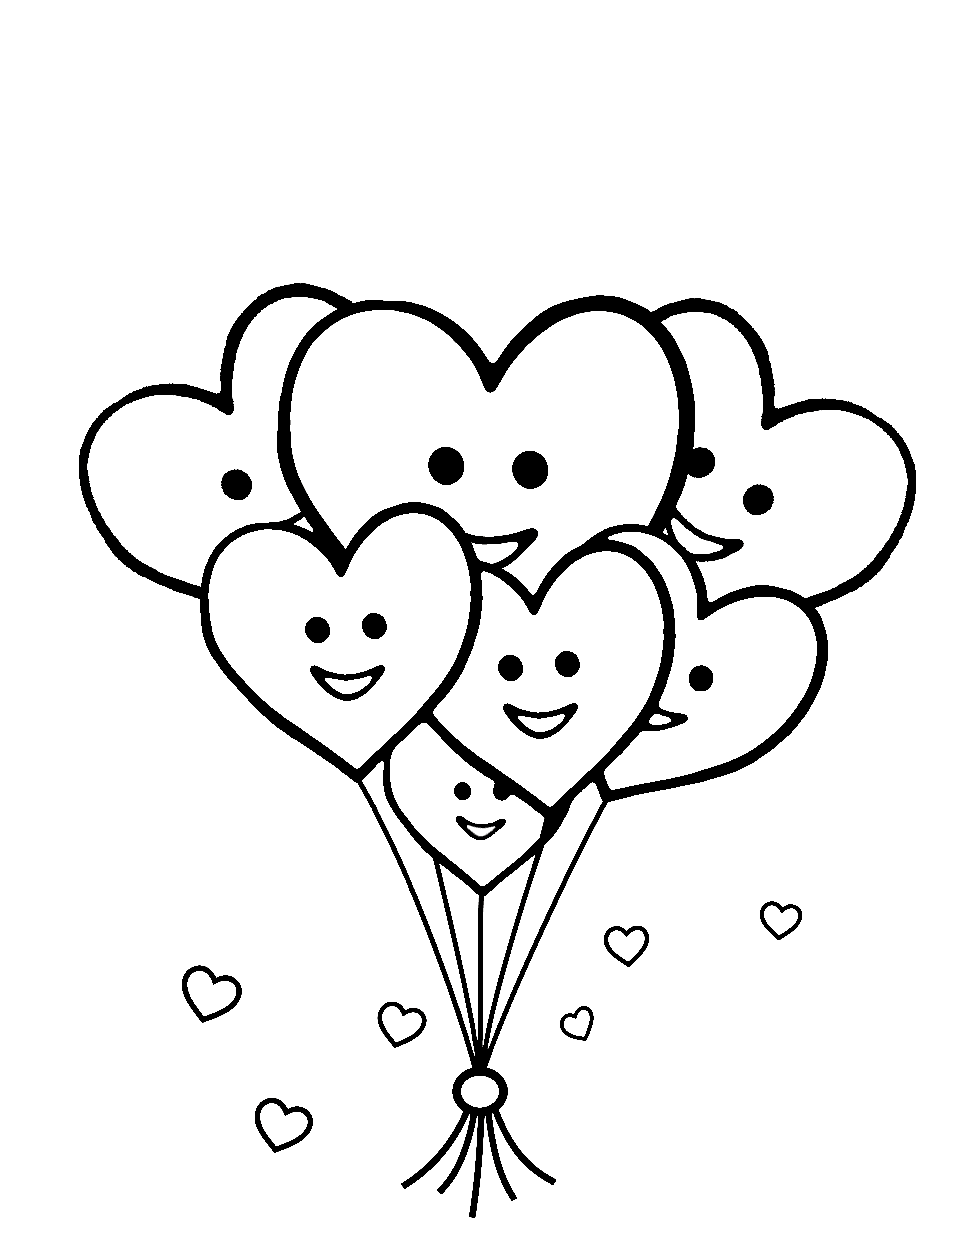 Kawaii Heart Balloons Coloring Page - Cute kawaii heart-shaped balloons with smiling faces floating in the sky.